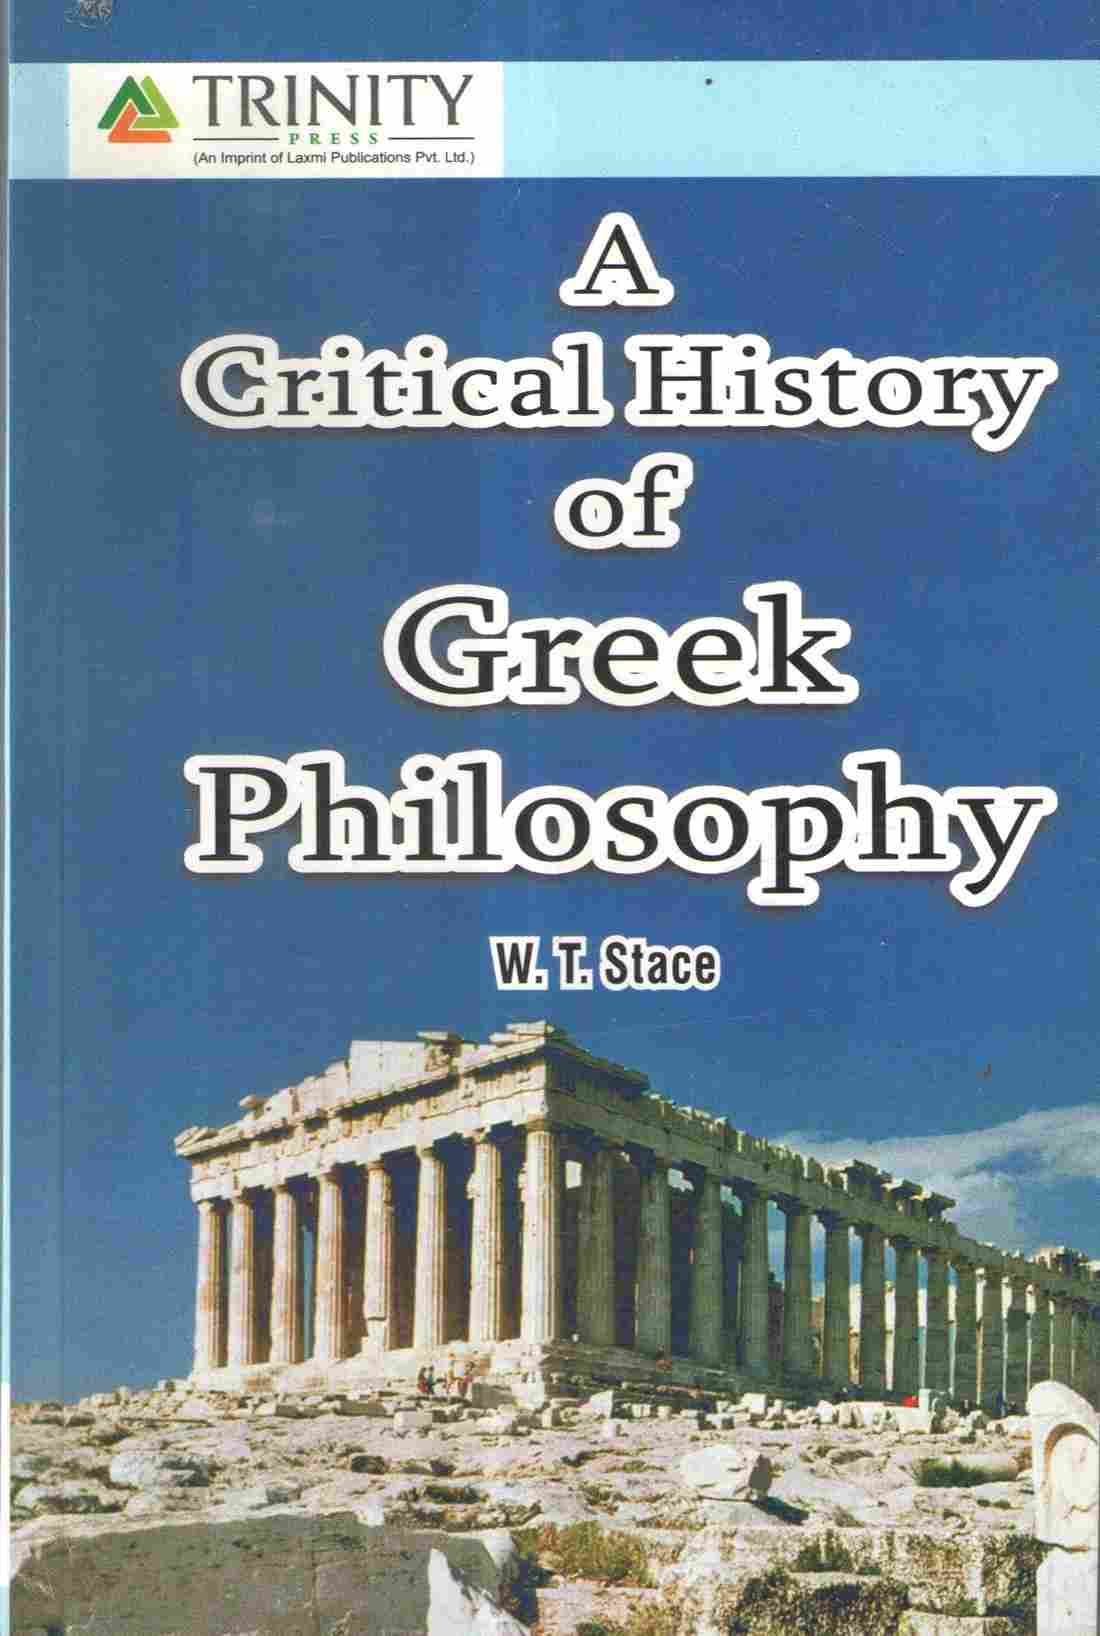 A-Critical-History-of-Greek-Philosophy-1st-Edition